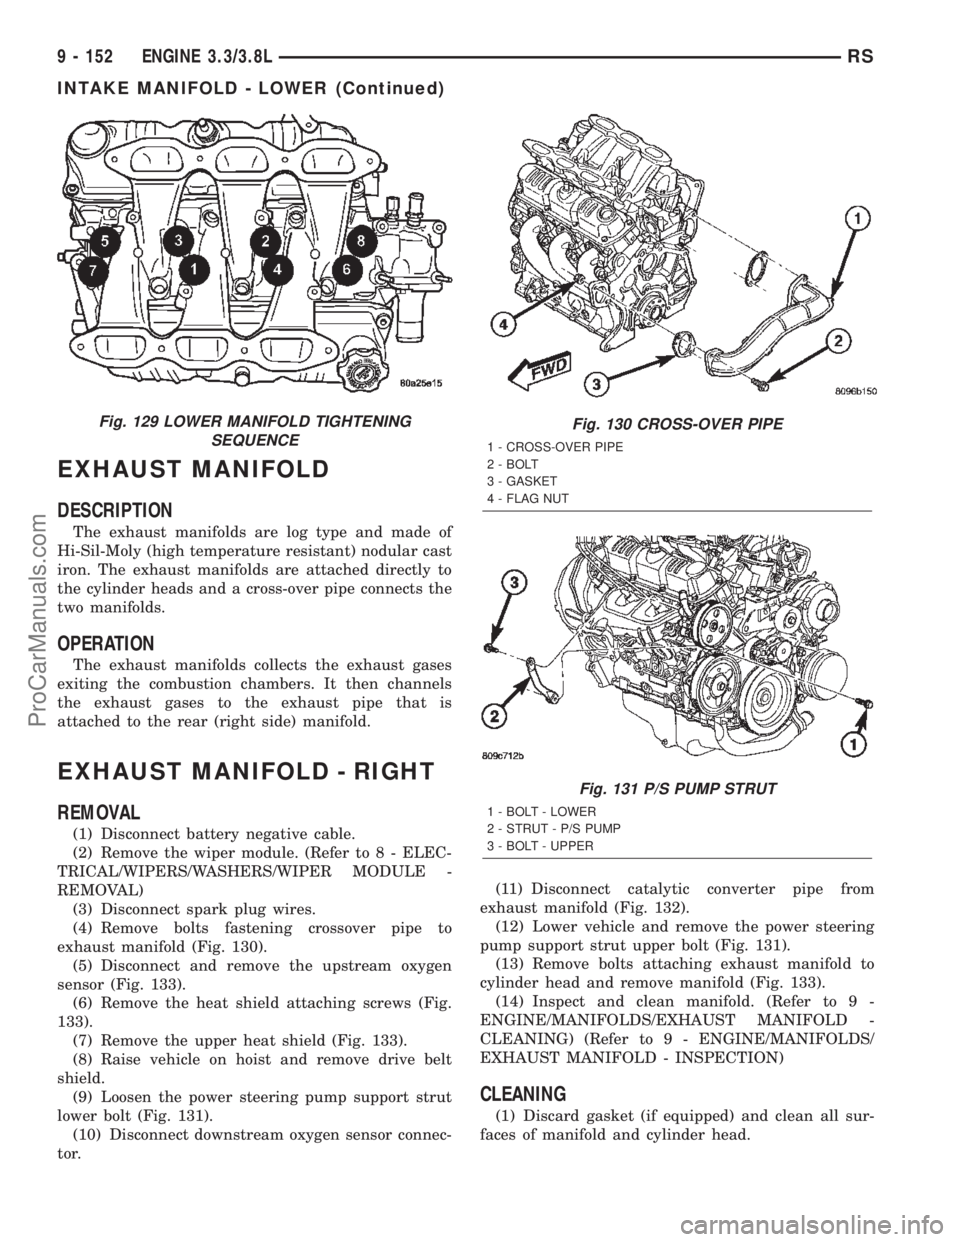 CHRYSLER VOYAGER 2002  Service Manual EXHAUST MANIFOLD
DESCRIPTION
The exhaust manifolds are log type and made of
Hi-Sil-Moly (high temperature resistant) nodular cast
iron. The exhaust manifolds are attached directly to
the cylinder head